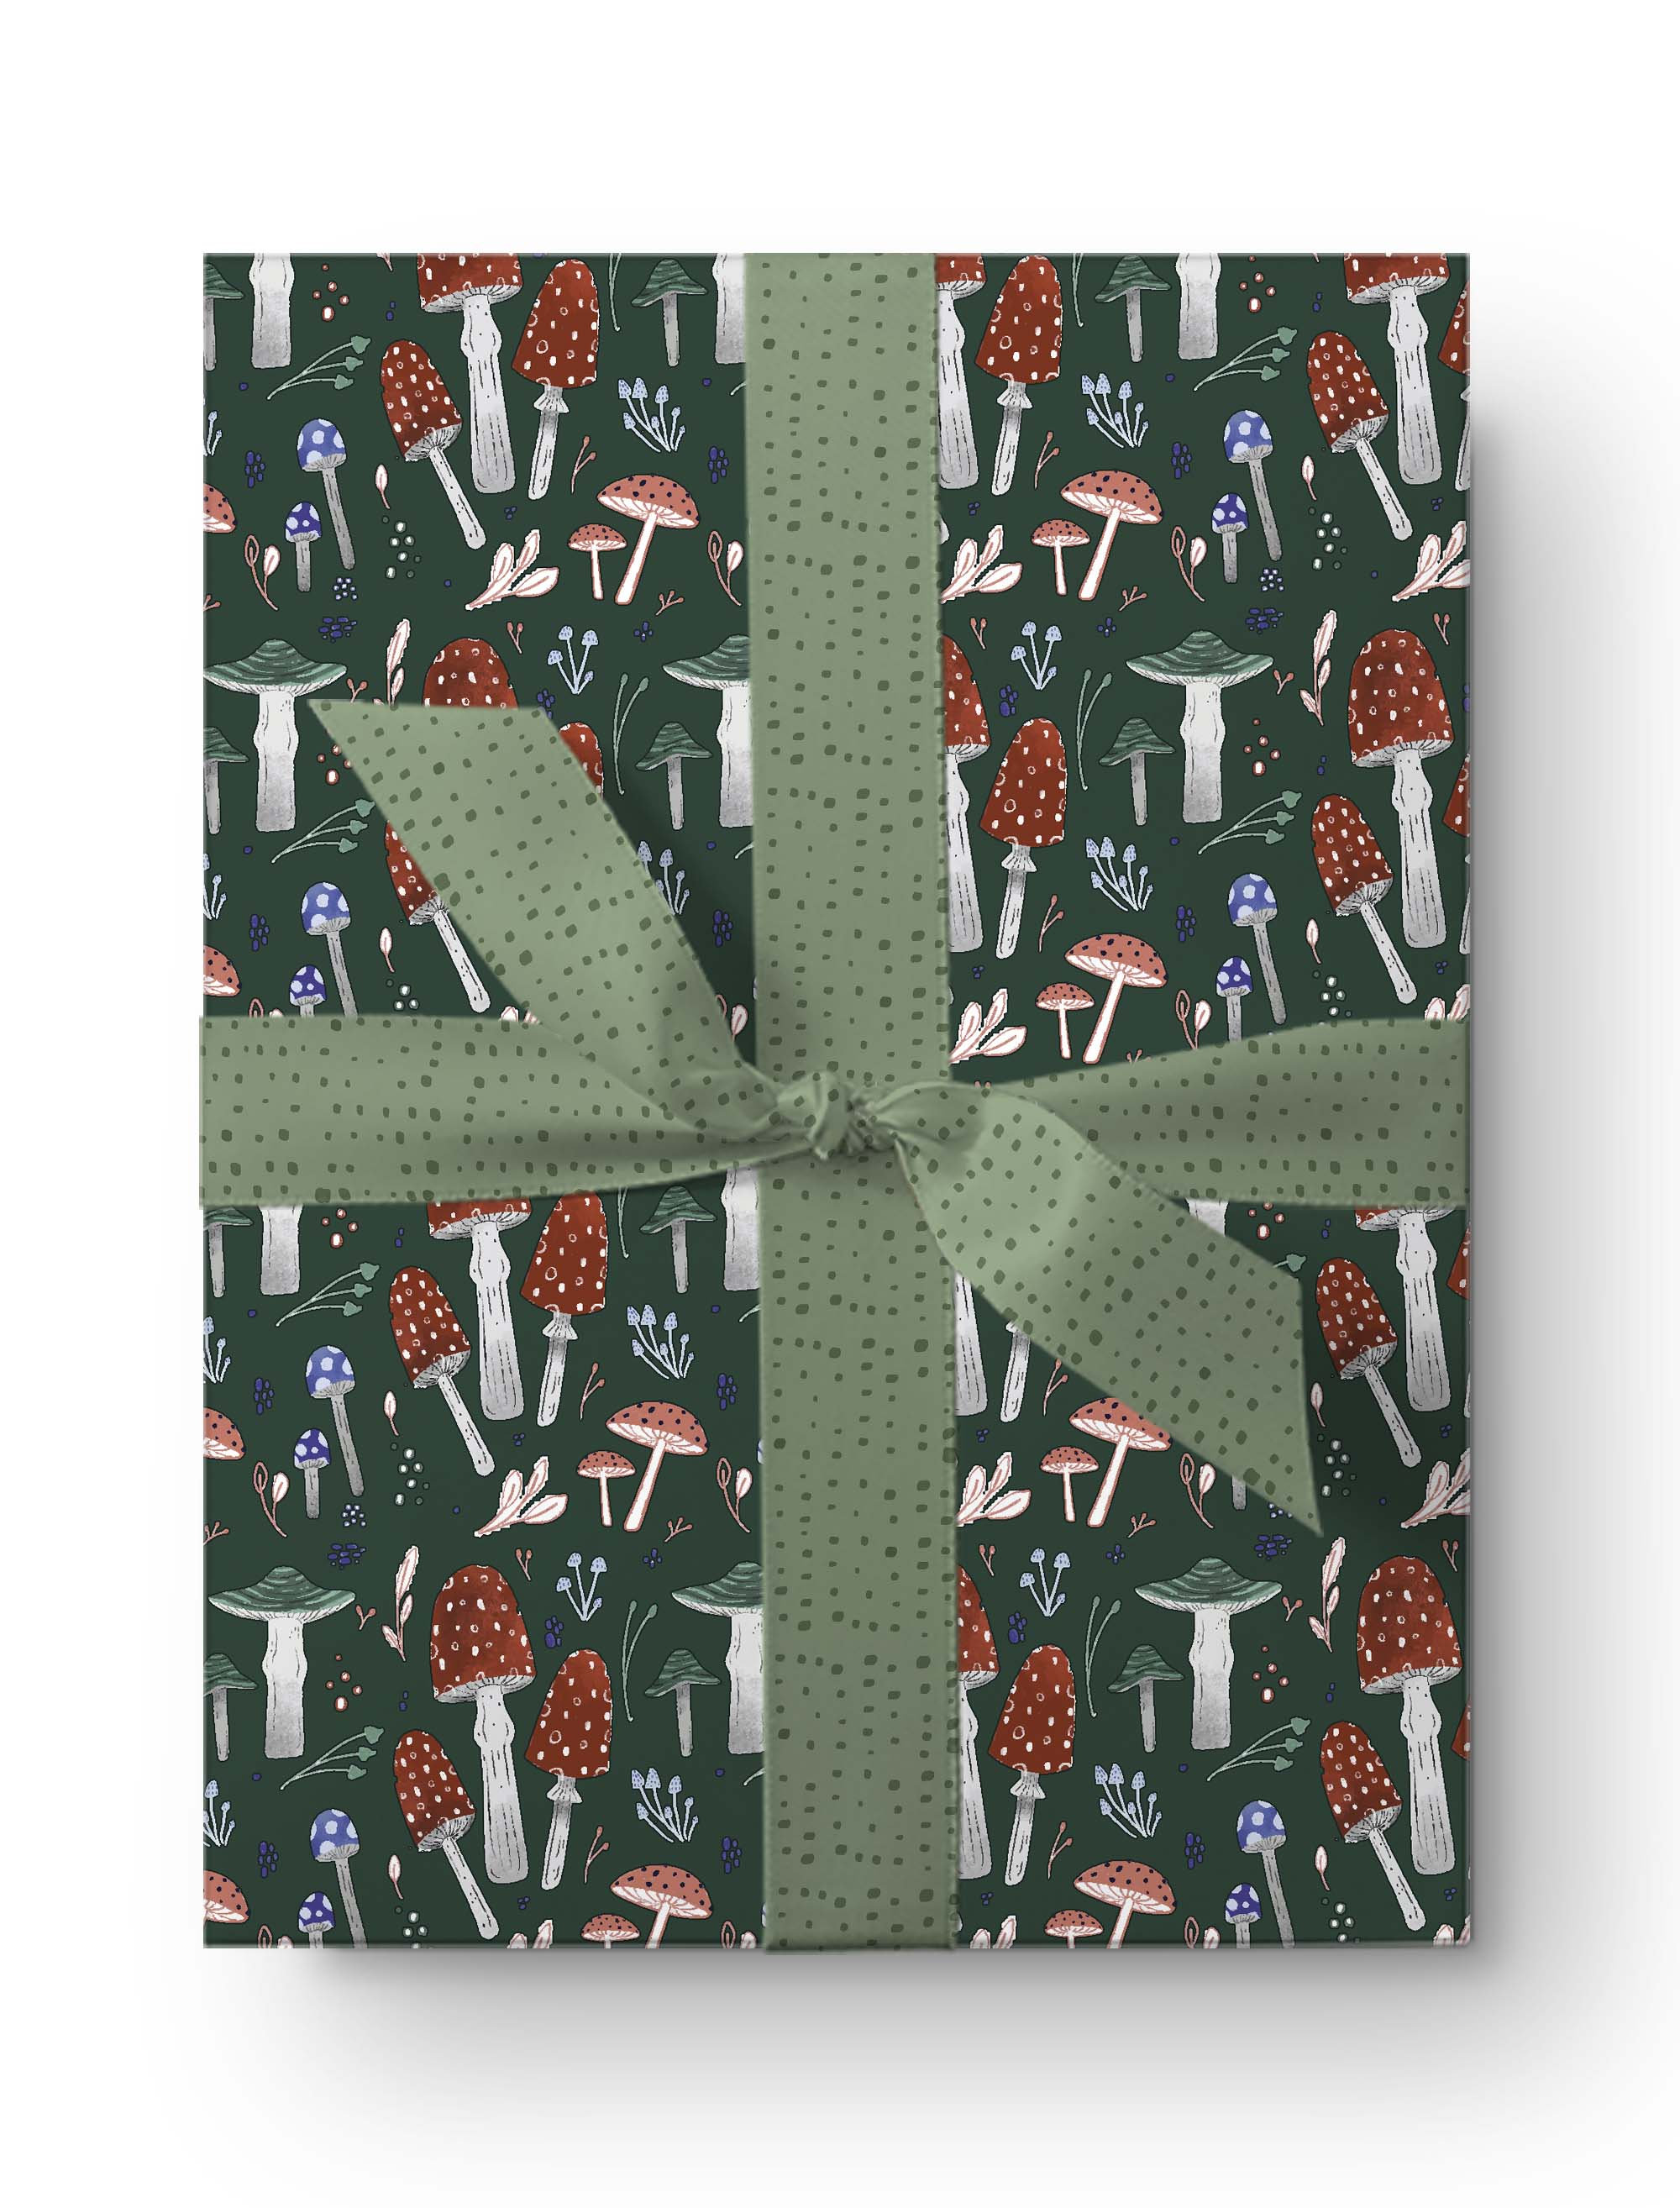 Happy Santa Riding A Rocket Luxury Thick Wrapping Paper, Christmas Space  Decor Kids Gift Wrap, Xmas Astronomy Theme (12 foot x 30 inch roll)